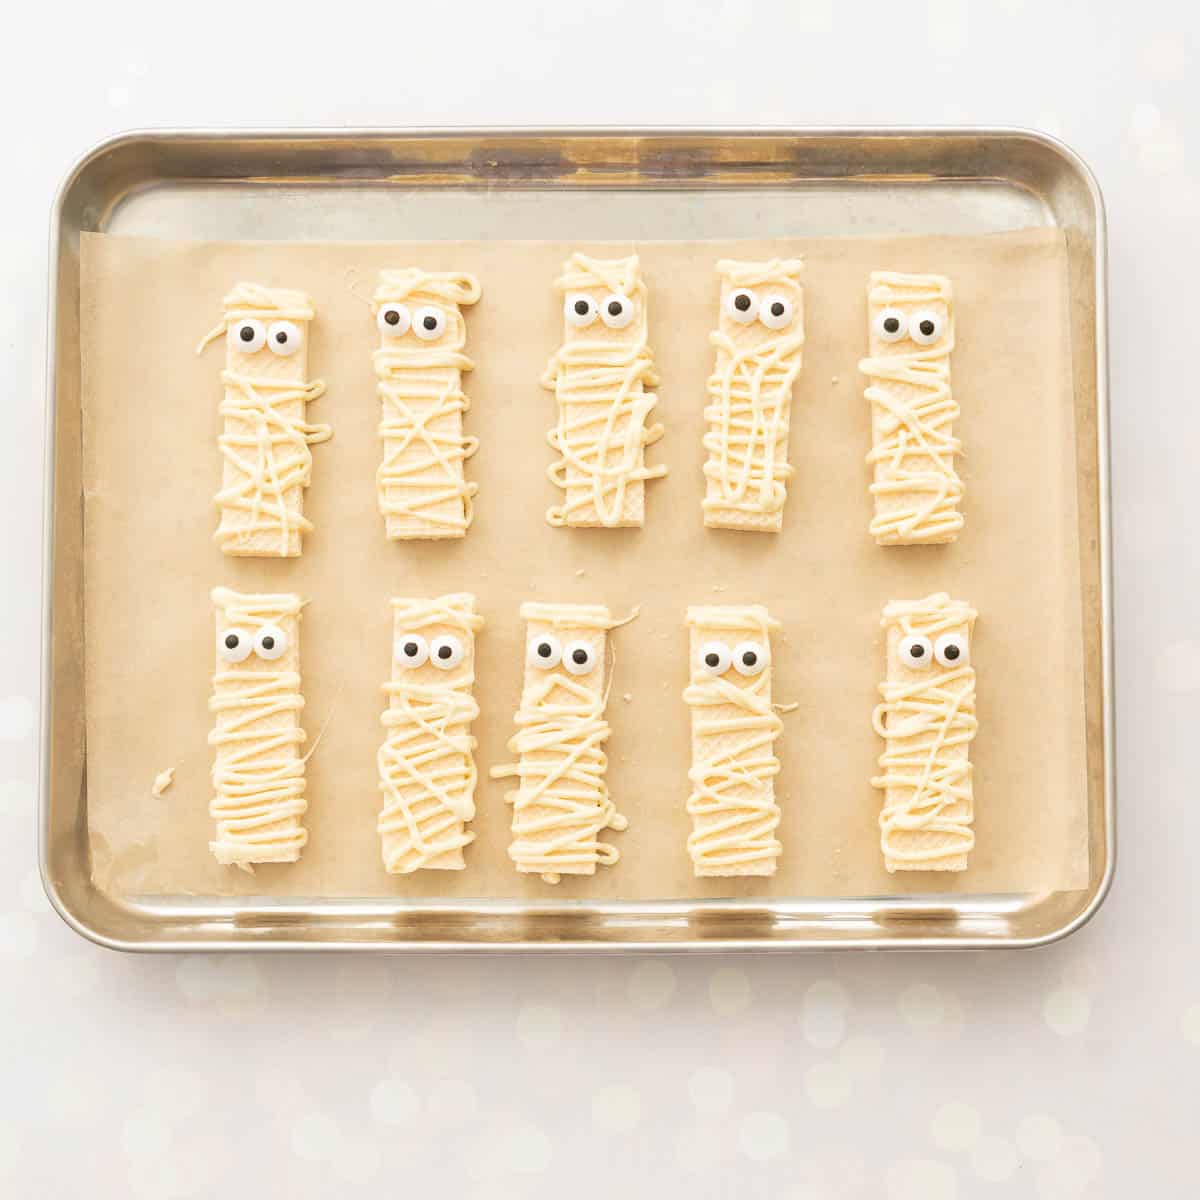 Ten wafer biscuits decorated to look like mummies with melted white chocolate and candy eyes